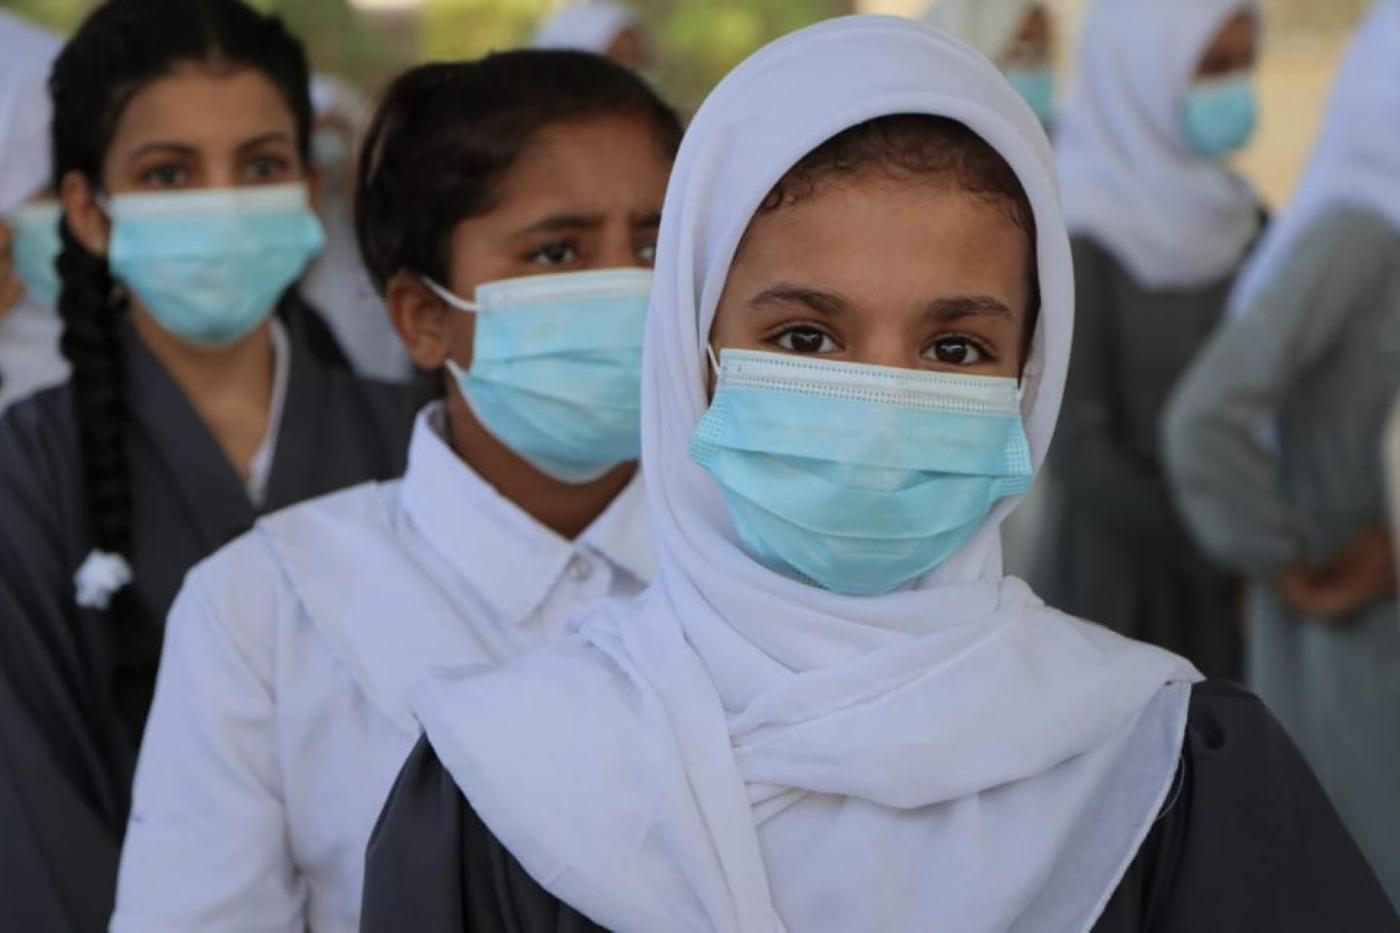 Girls in southern Yemen wearing face masks as they return to school following months of closure due to the COVID-19 pandemic.